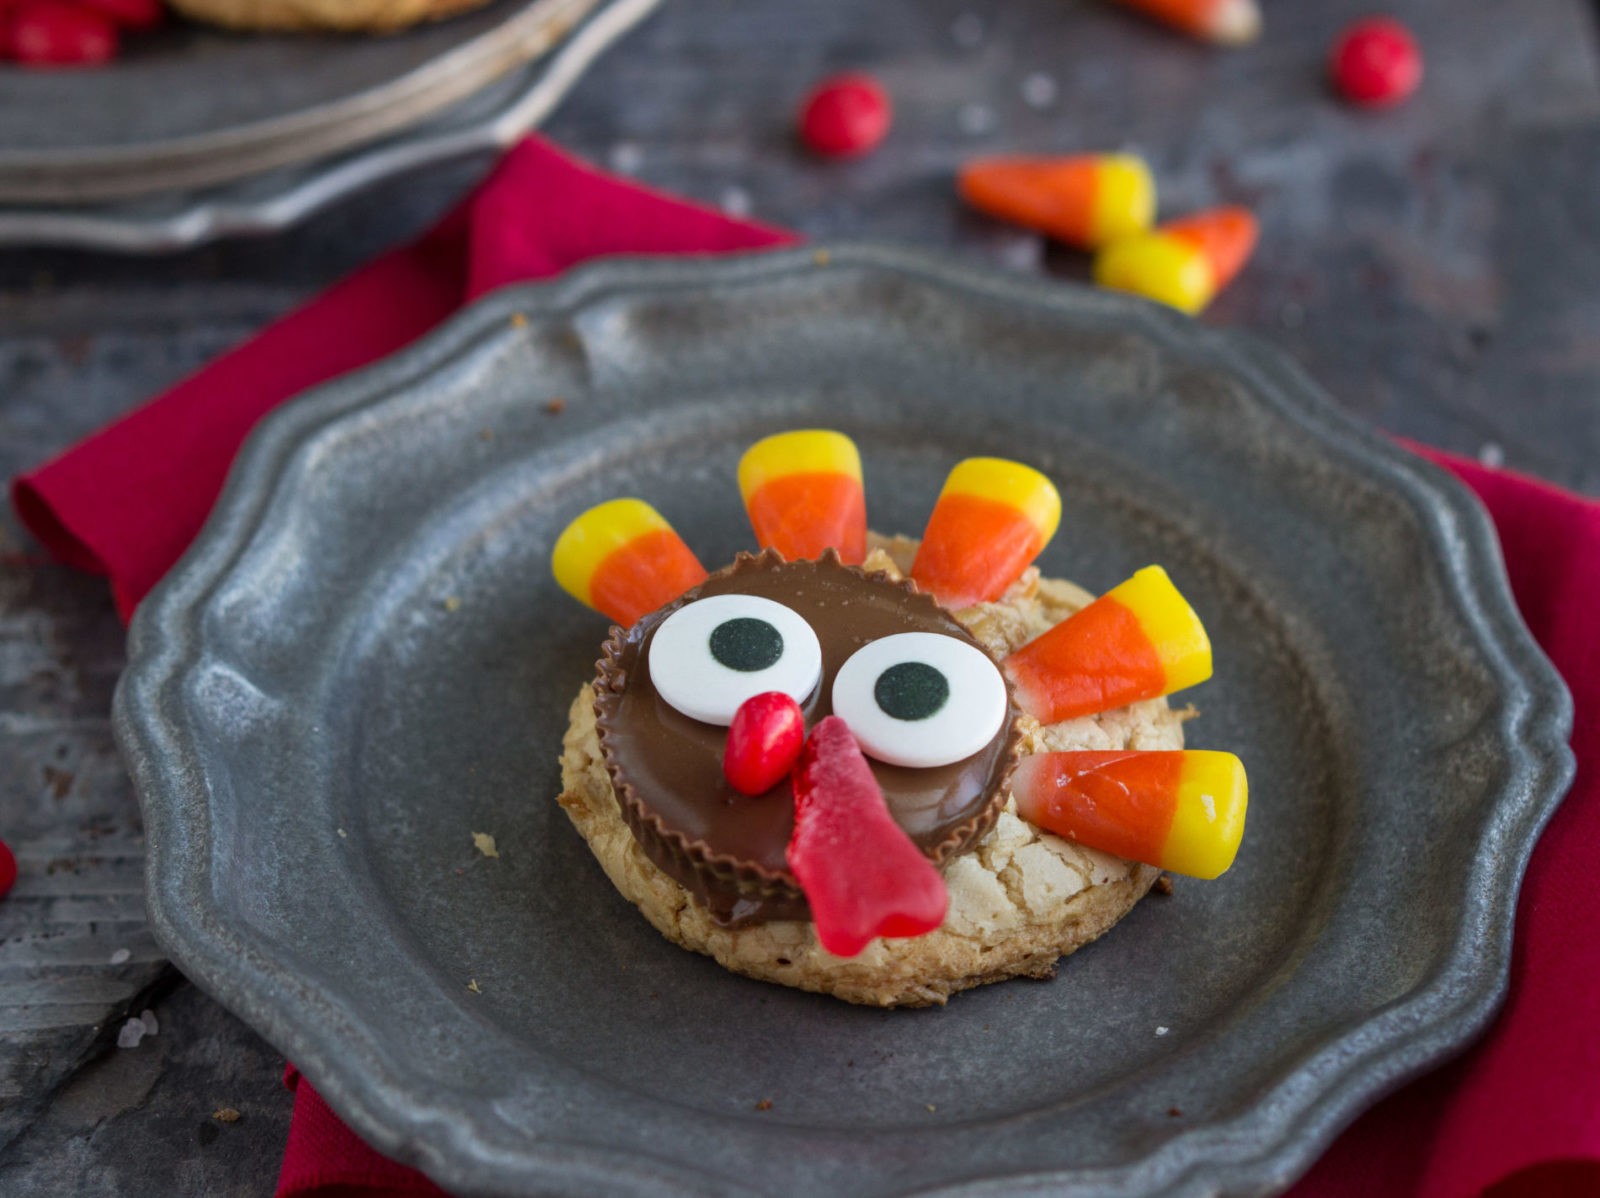 Turkey cookies for thanksgiving.